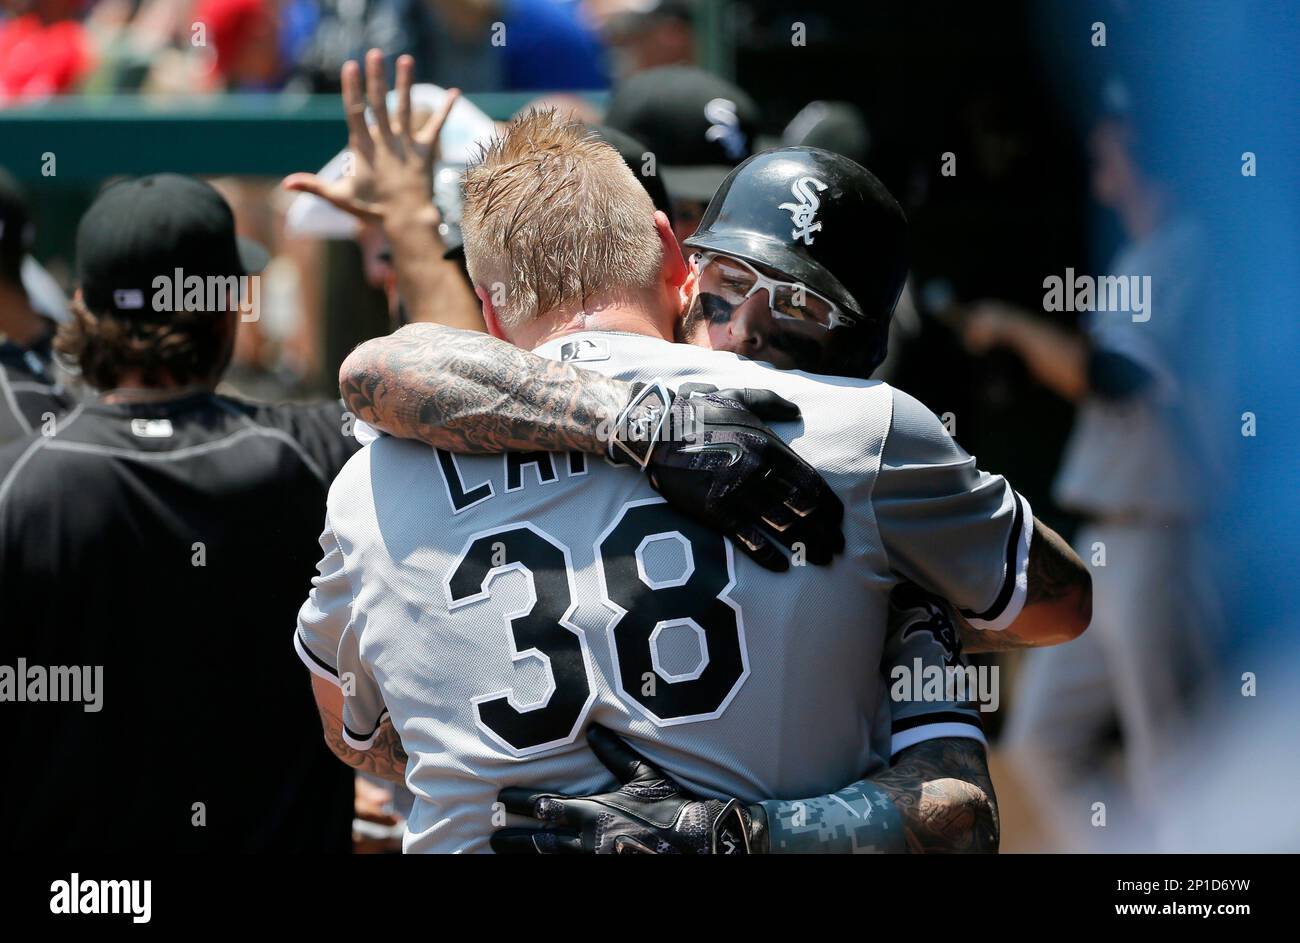 https://c8.alamy.com/comp/2P1D6YW/chicago-white-sox-starting-pitcher-mat-latos-and-brett-lawrie-38-celebrate-in-the-dugout-after-lawries-two-run-home-run-off-of-texas-rangers-cole-hamels-in-the-fourth-inning-of-a-baseball-game-wednesday-may-11-2016-in-arlington-texas-the-hit-also-scored-melky-cabrera-ap-phototony-gutierrez-2P1D6YW.jpg